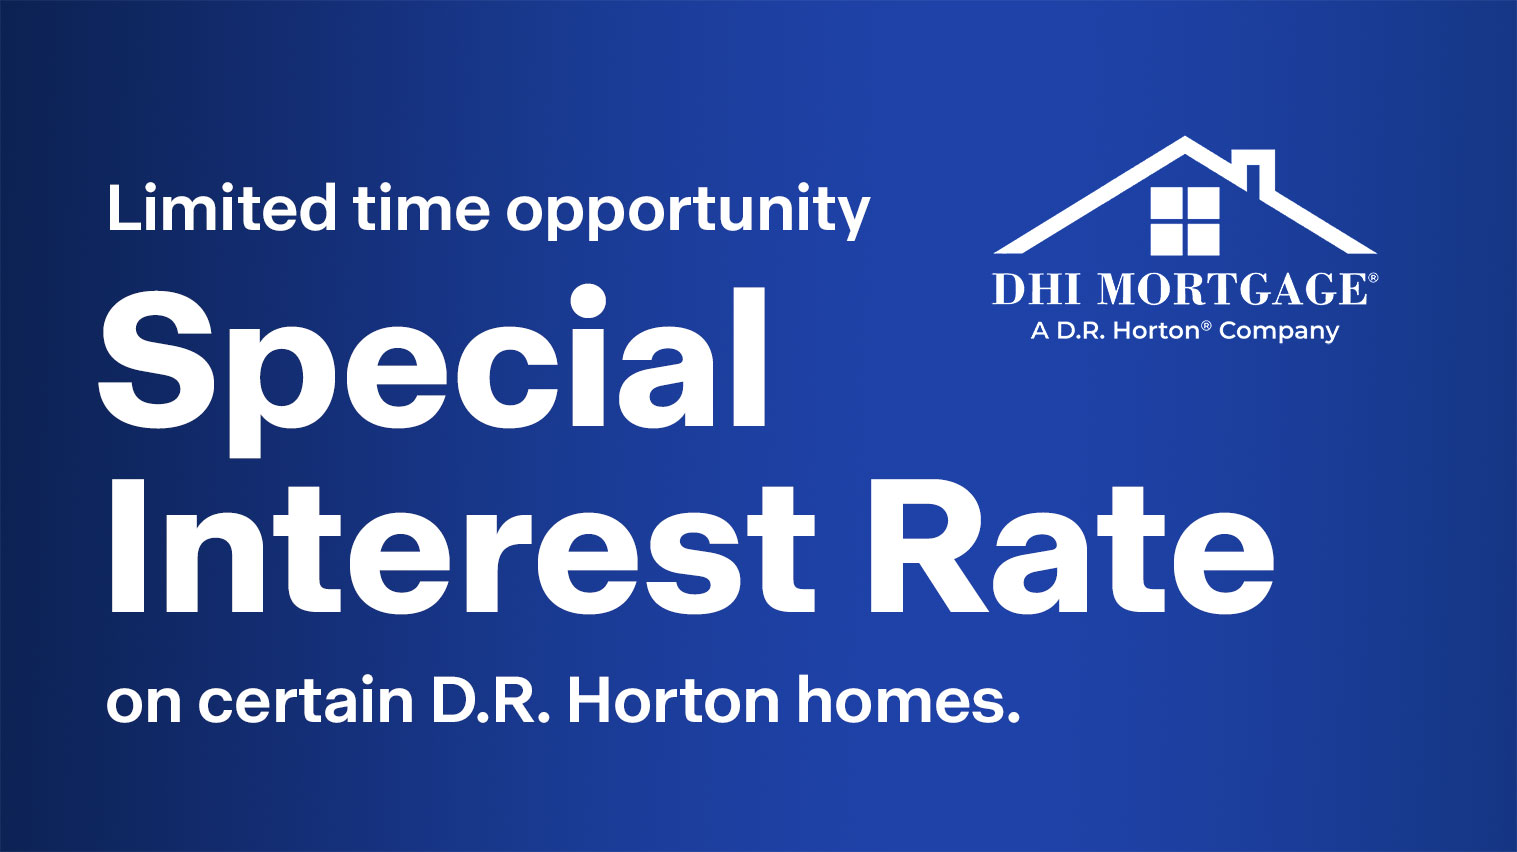 Limited time opportunity. Special interest rates on certain D.R. Horton homes. Blue background. DHI logo.